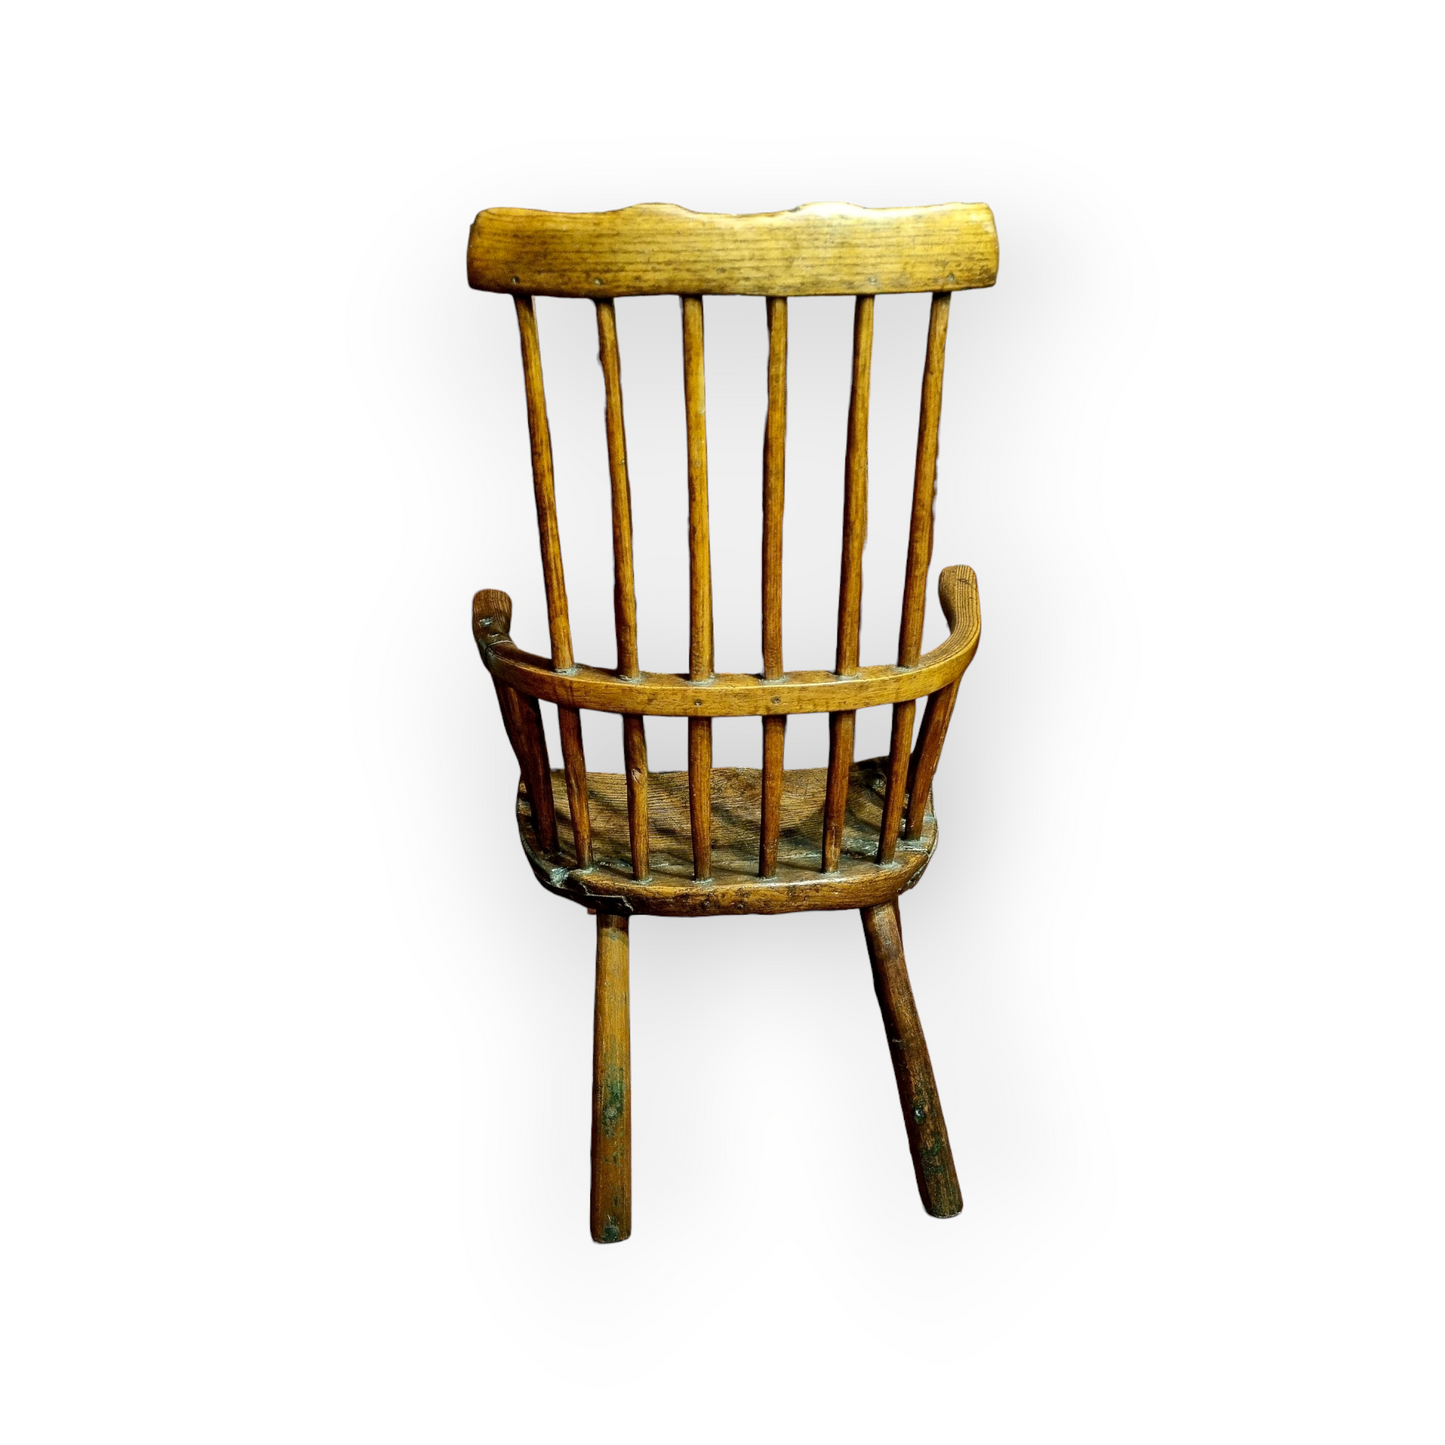 Late 18th Century English Antique West-Country Made Child's Comb-Back Windsor Armchair, circa 1780